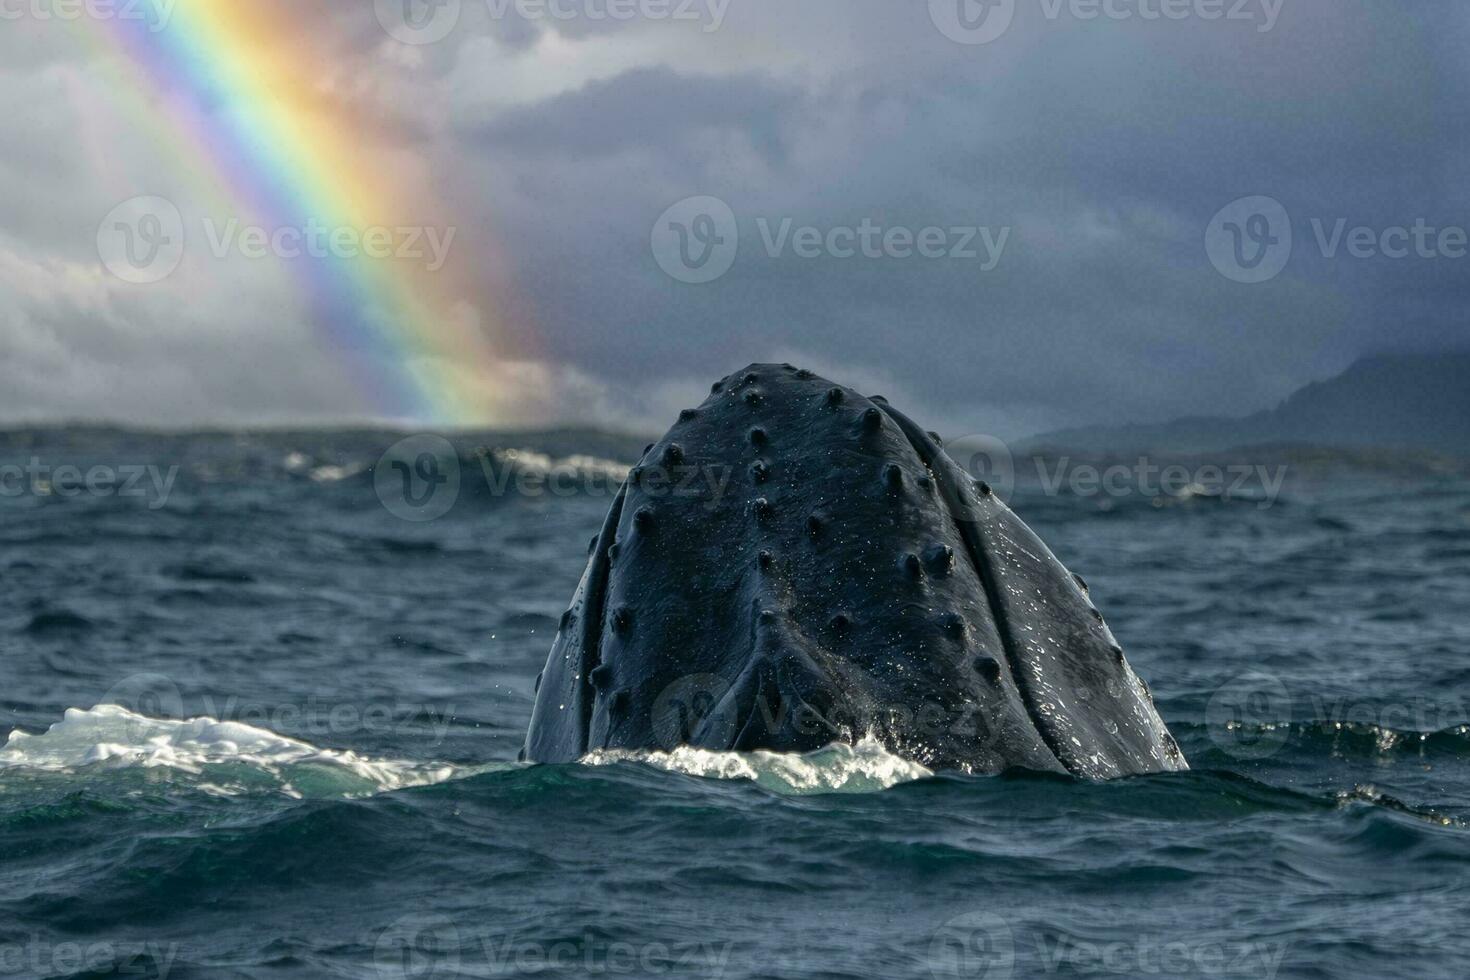 humpback whale breaching in pacific ocean rainbow background in cabo san lucas mexico baja california sur photo